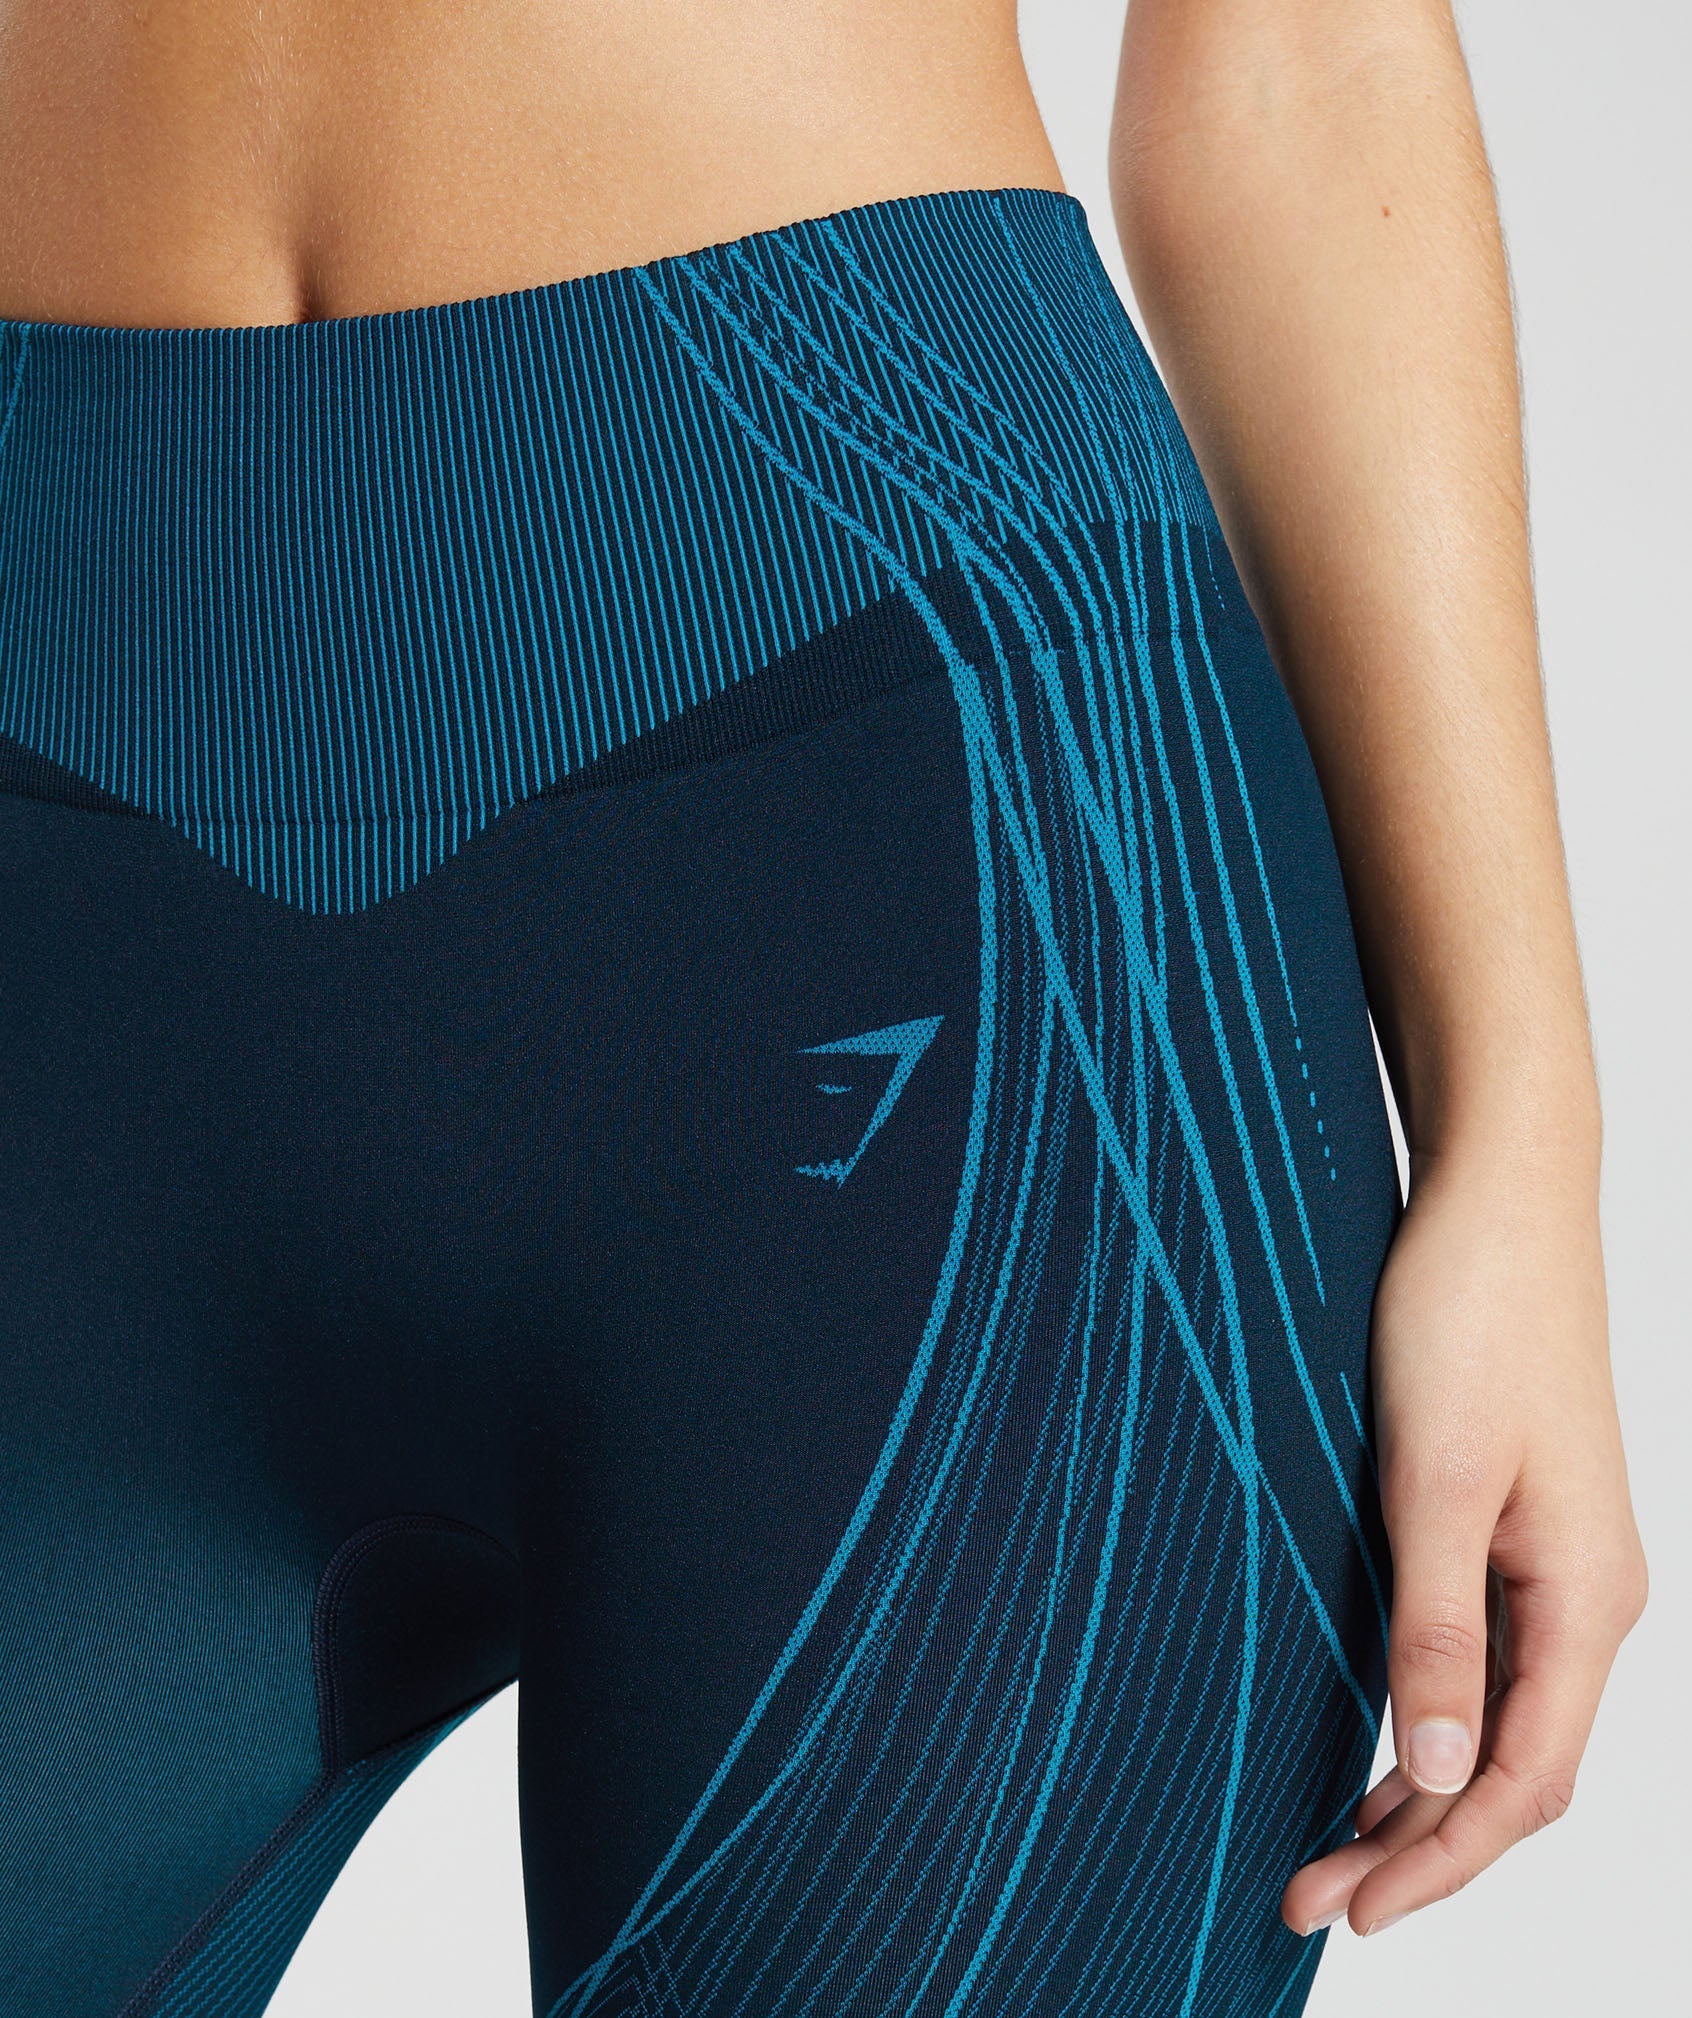 GS x Analis Leggings in Midnight Blue/Lats Blue - view 6